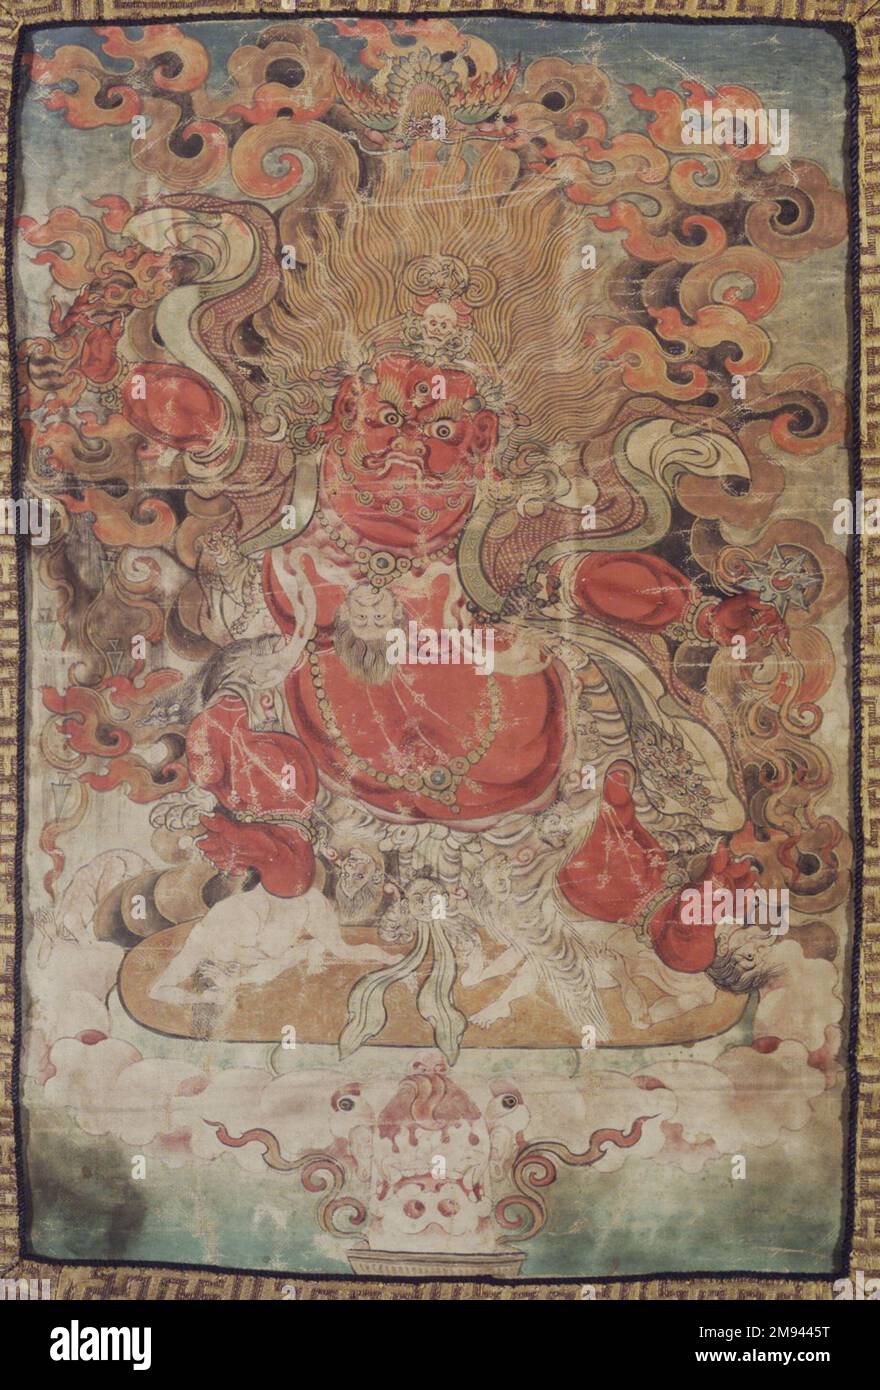 Wrathful Deity , late 18th-19th century. Hanging scroll, gouache on linen, 9 1/2 x 6 1/2 in. (24.1 x 16.5 cm).   Asian Art late 18th-19th century Stock Photo